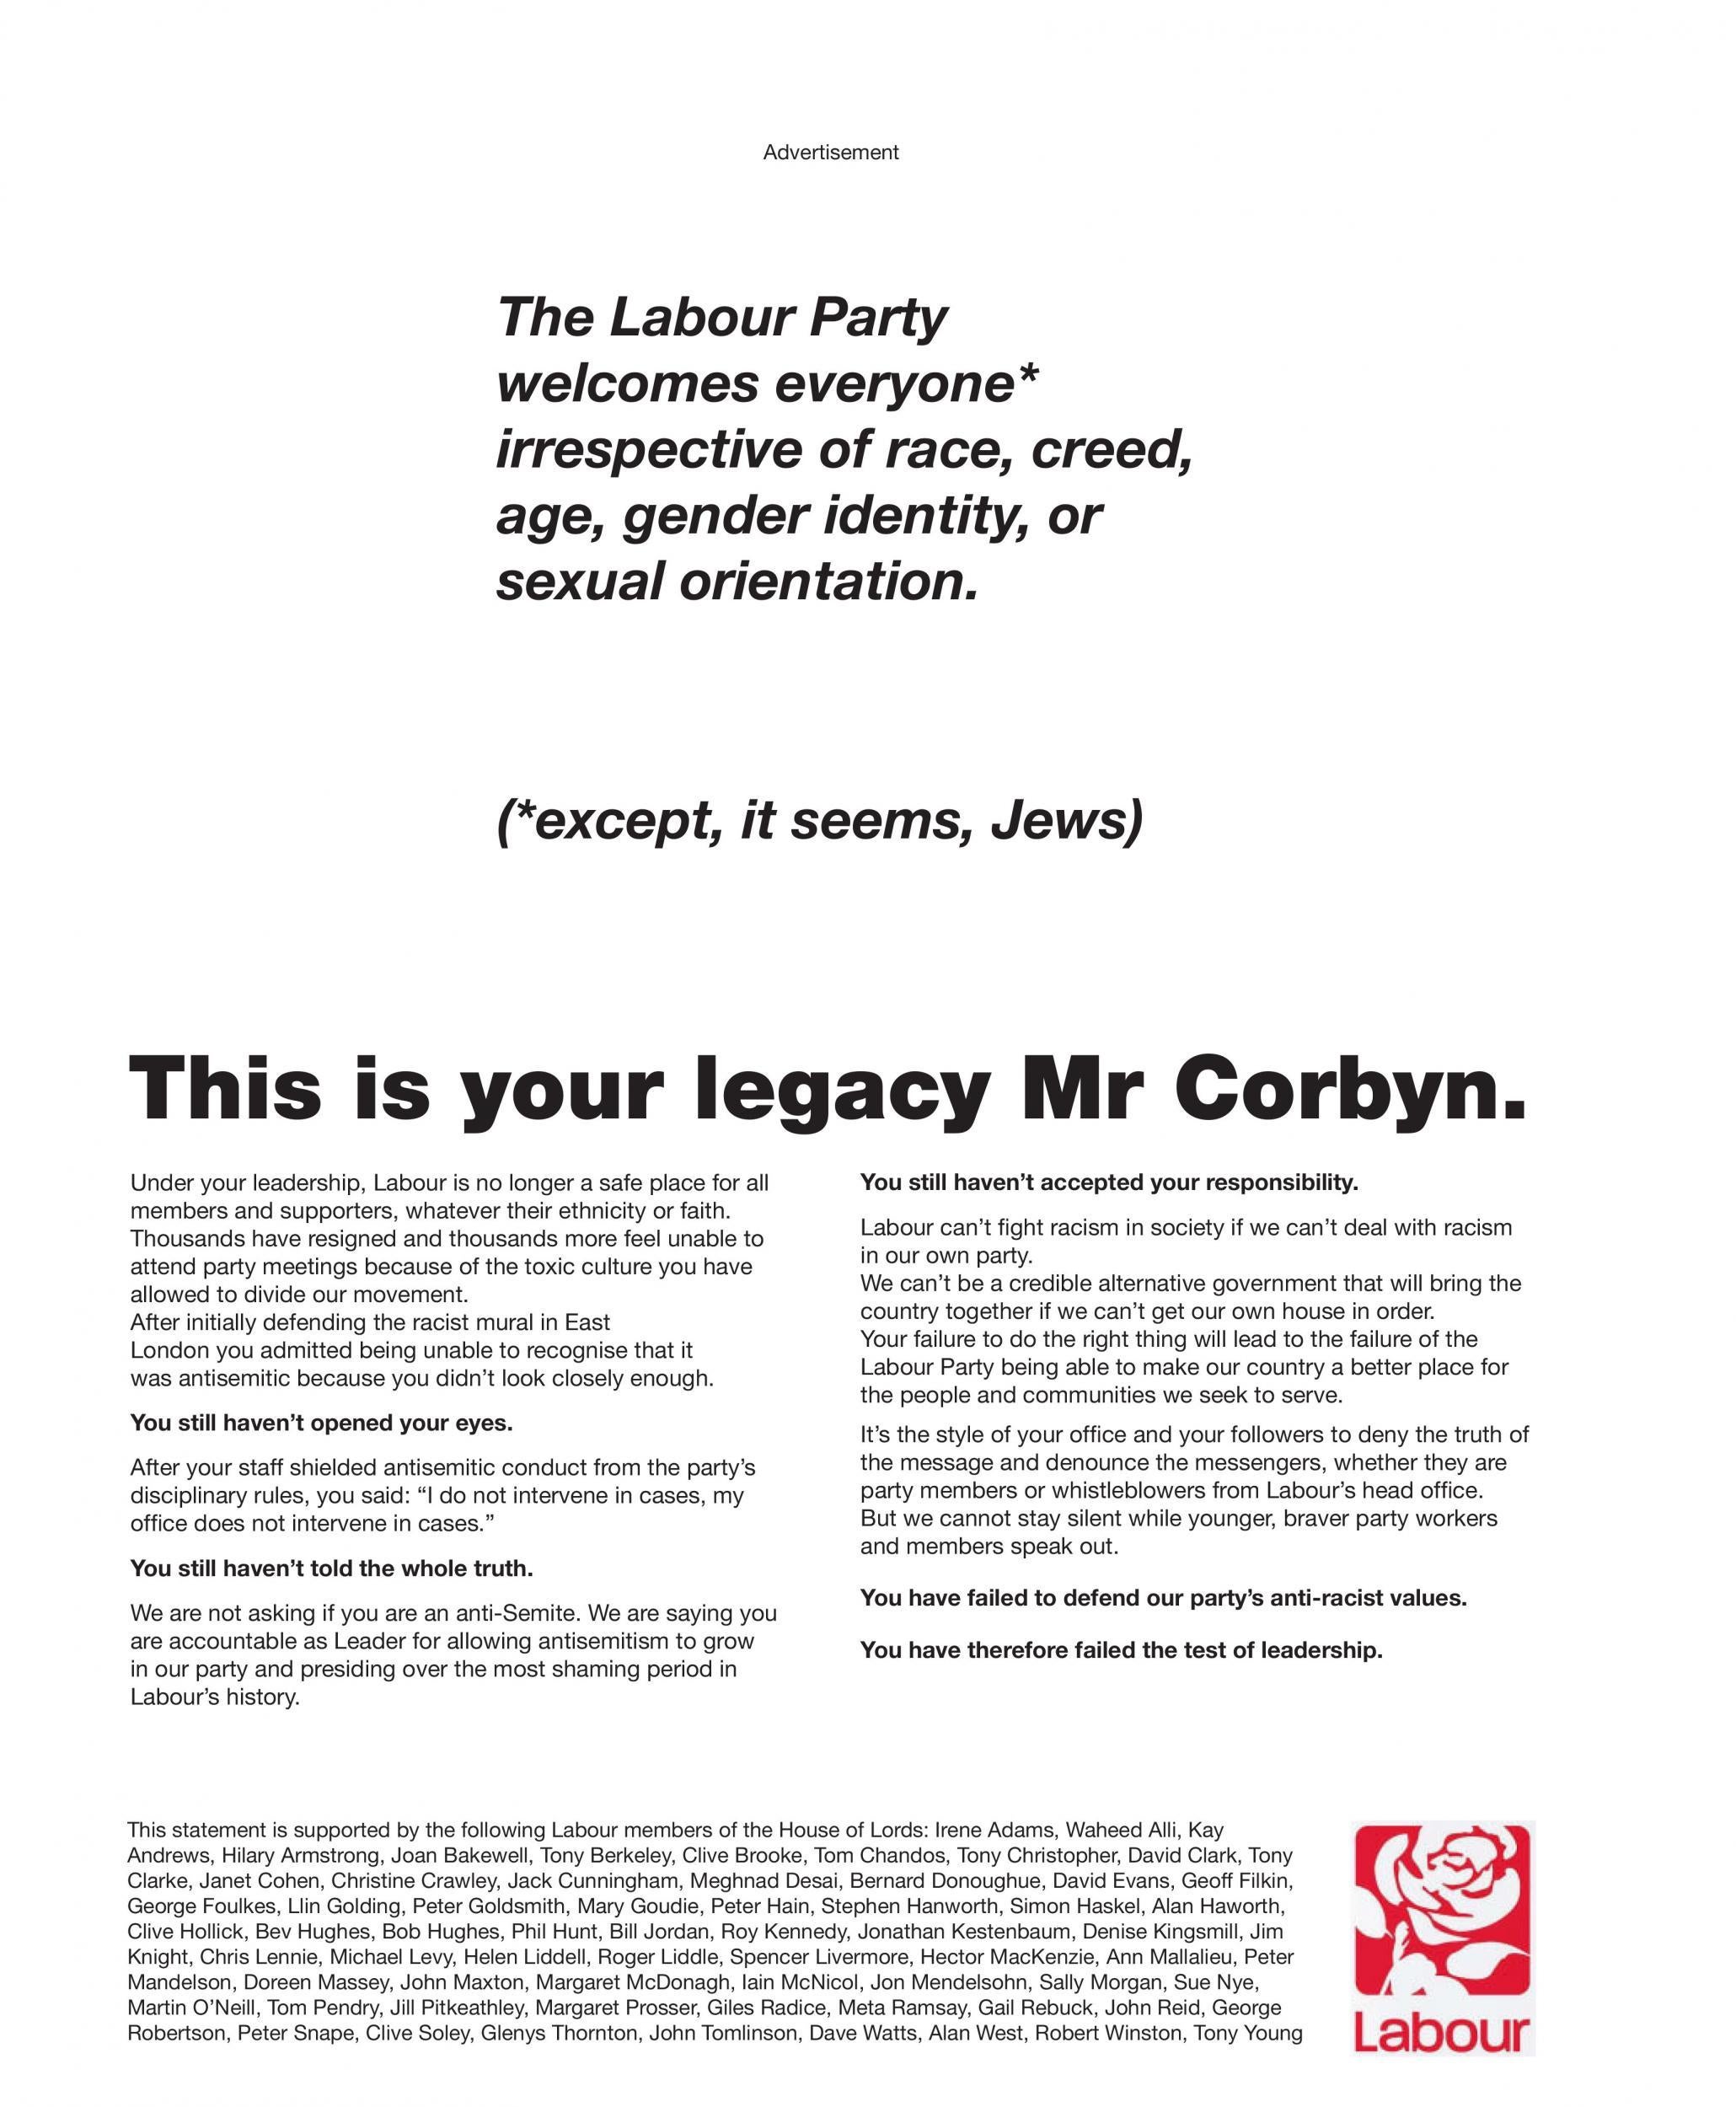 Peers’ advert in The Guardian newspaper published on Wednesday